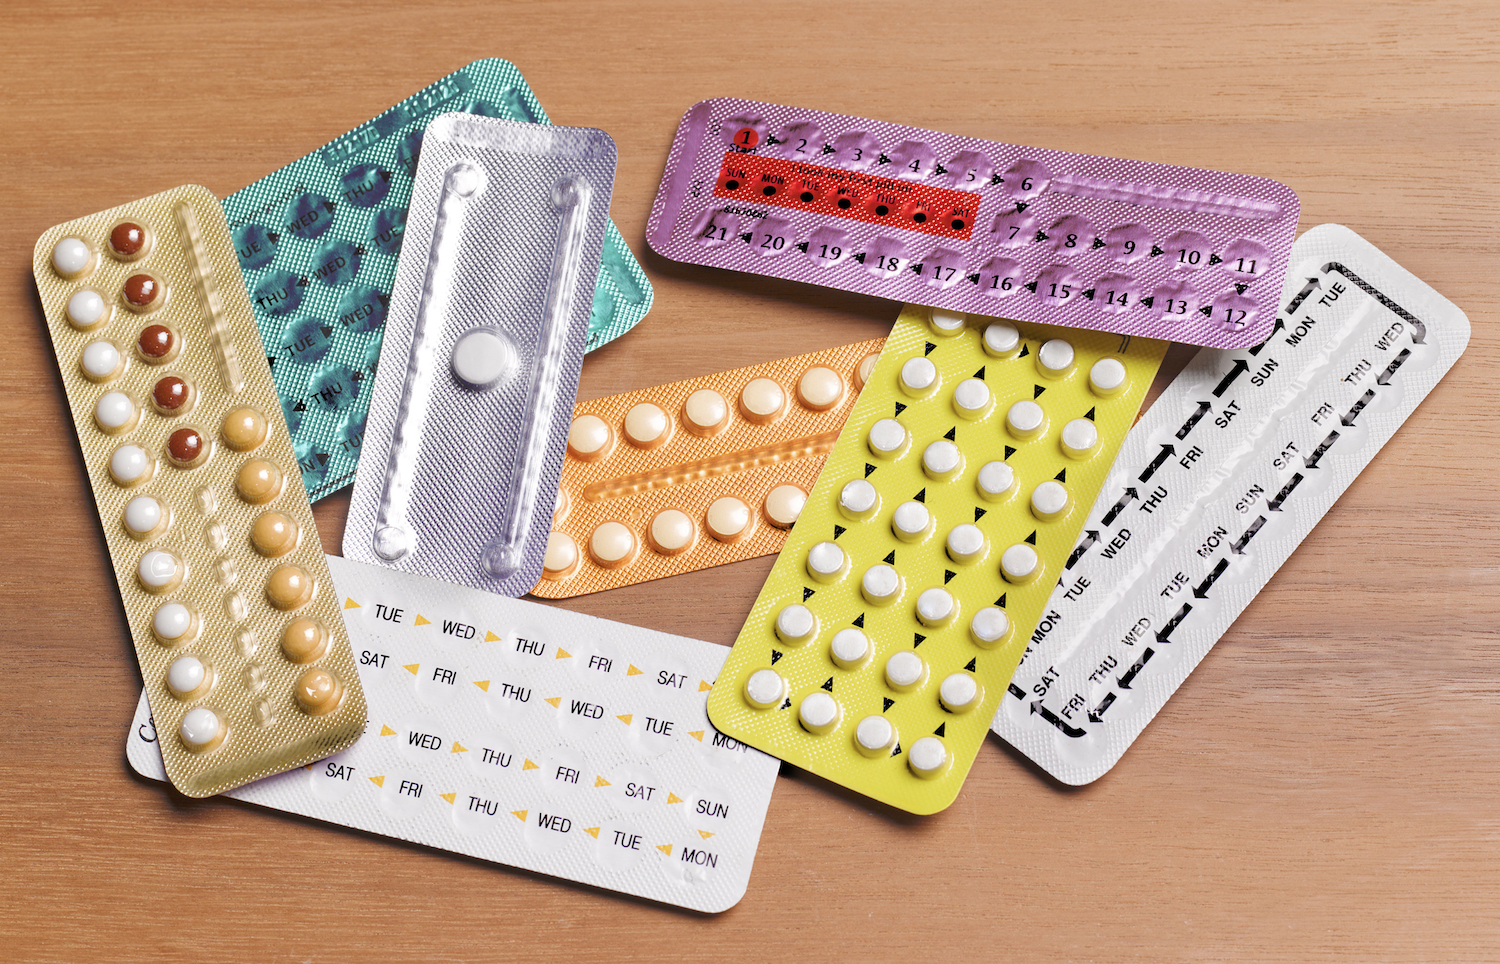 Side effects of the contraceptive pill